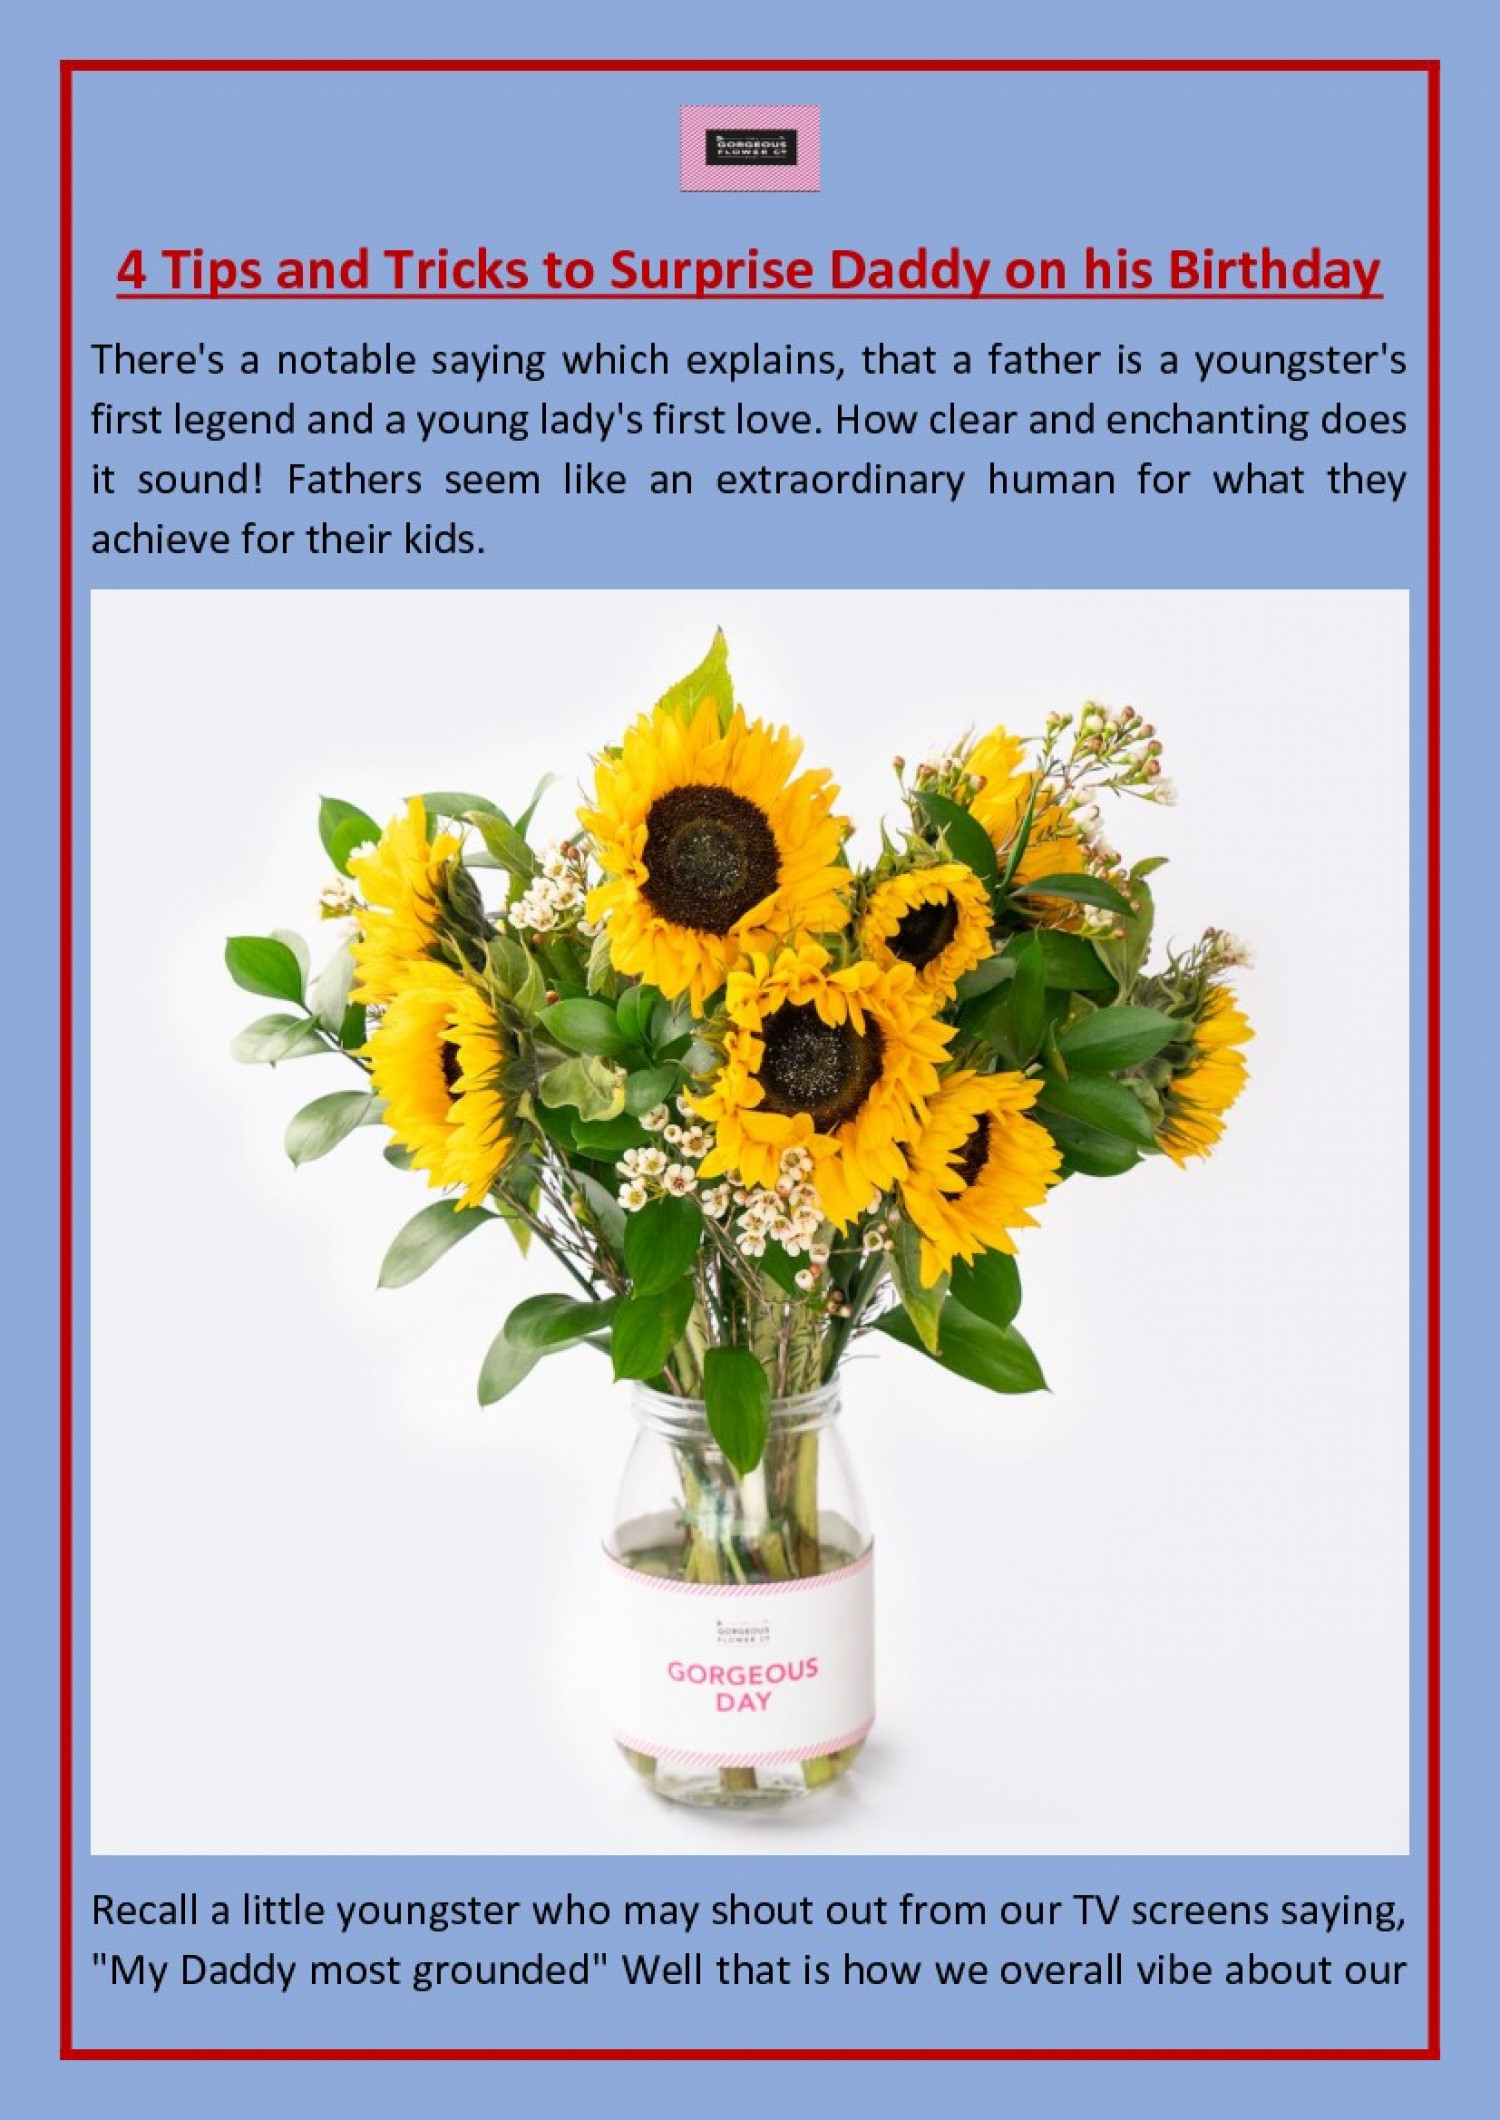 4 Tips and Tricks to Surprise Daddy on his Birthday Infographic